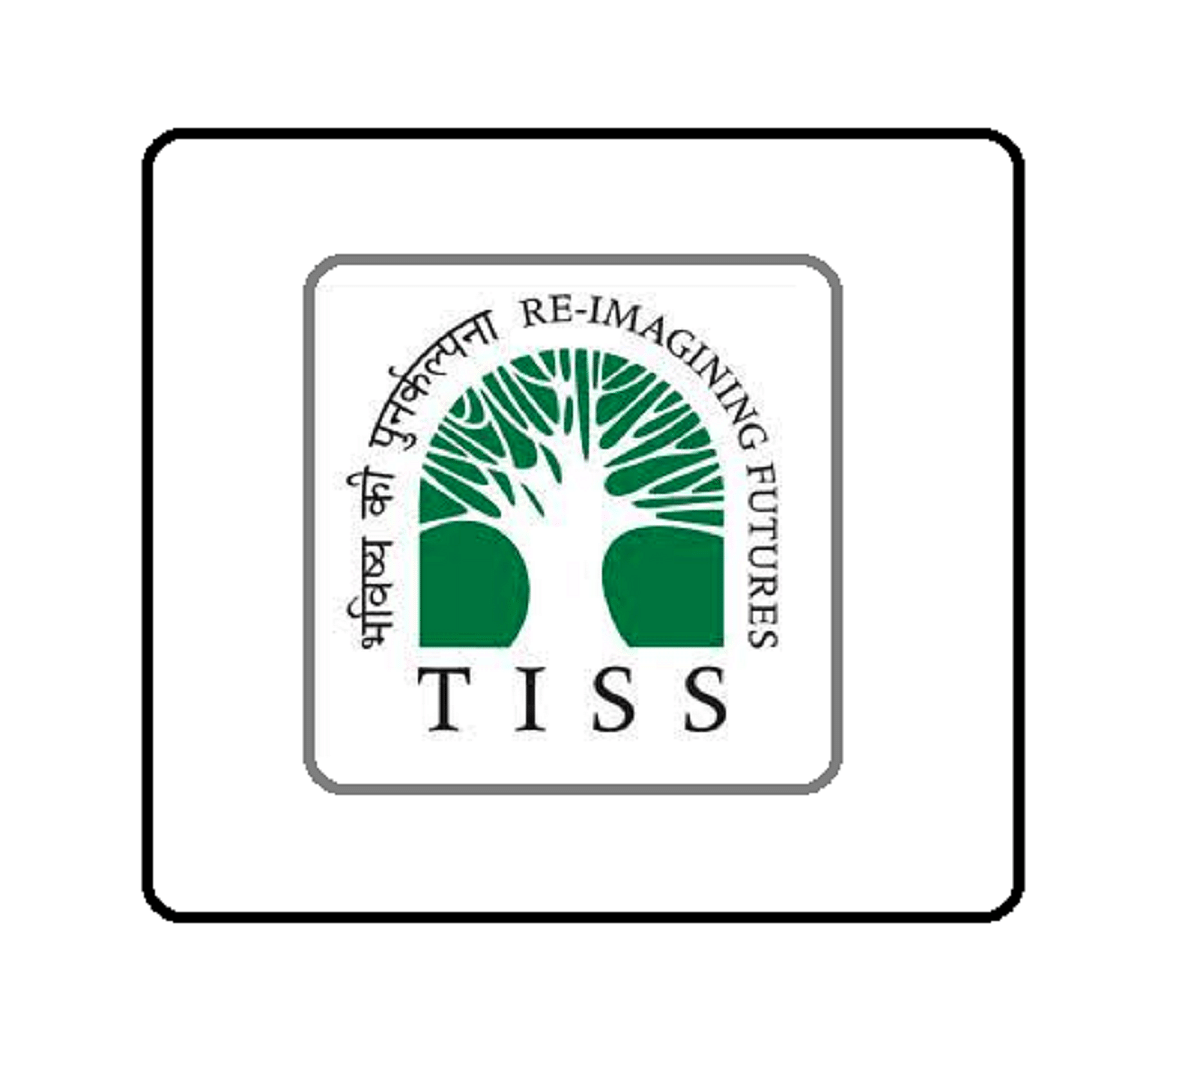 TISSNET 2019: Application Process Conclude in Two Days, Check Details Here